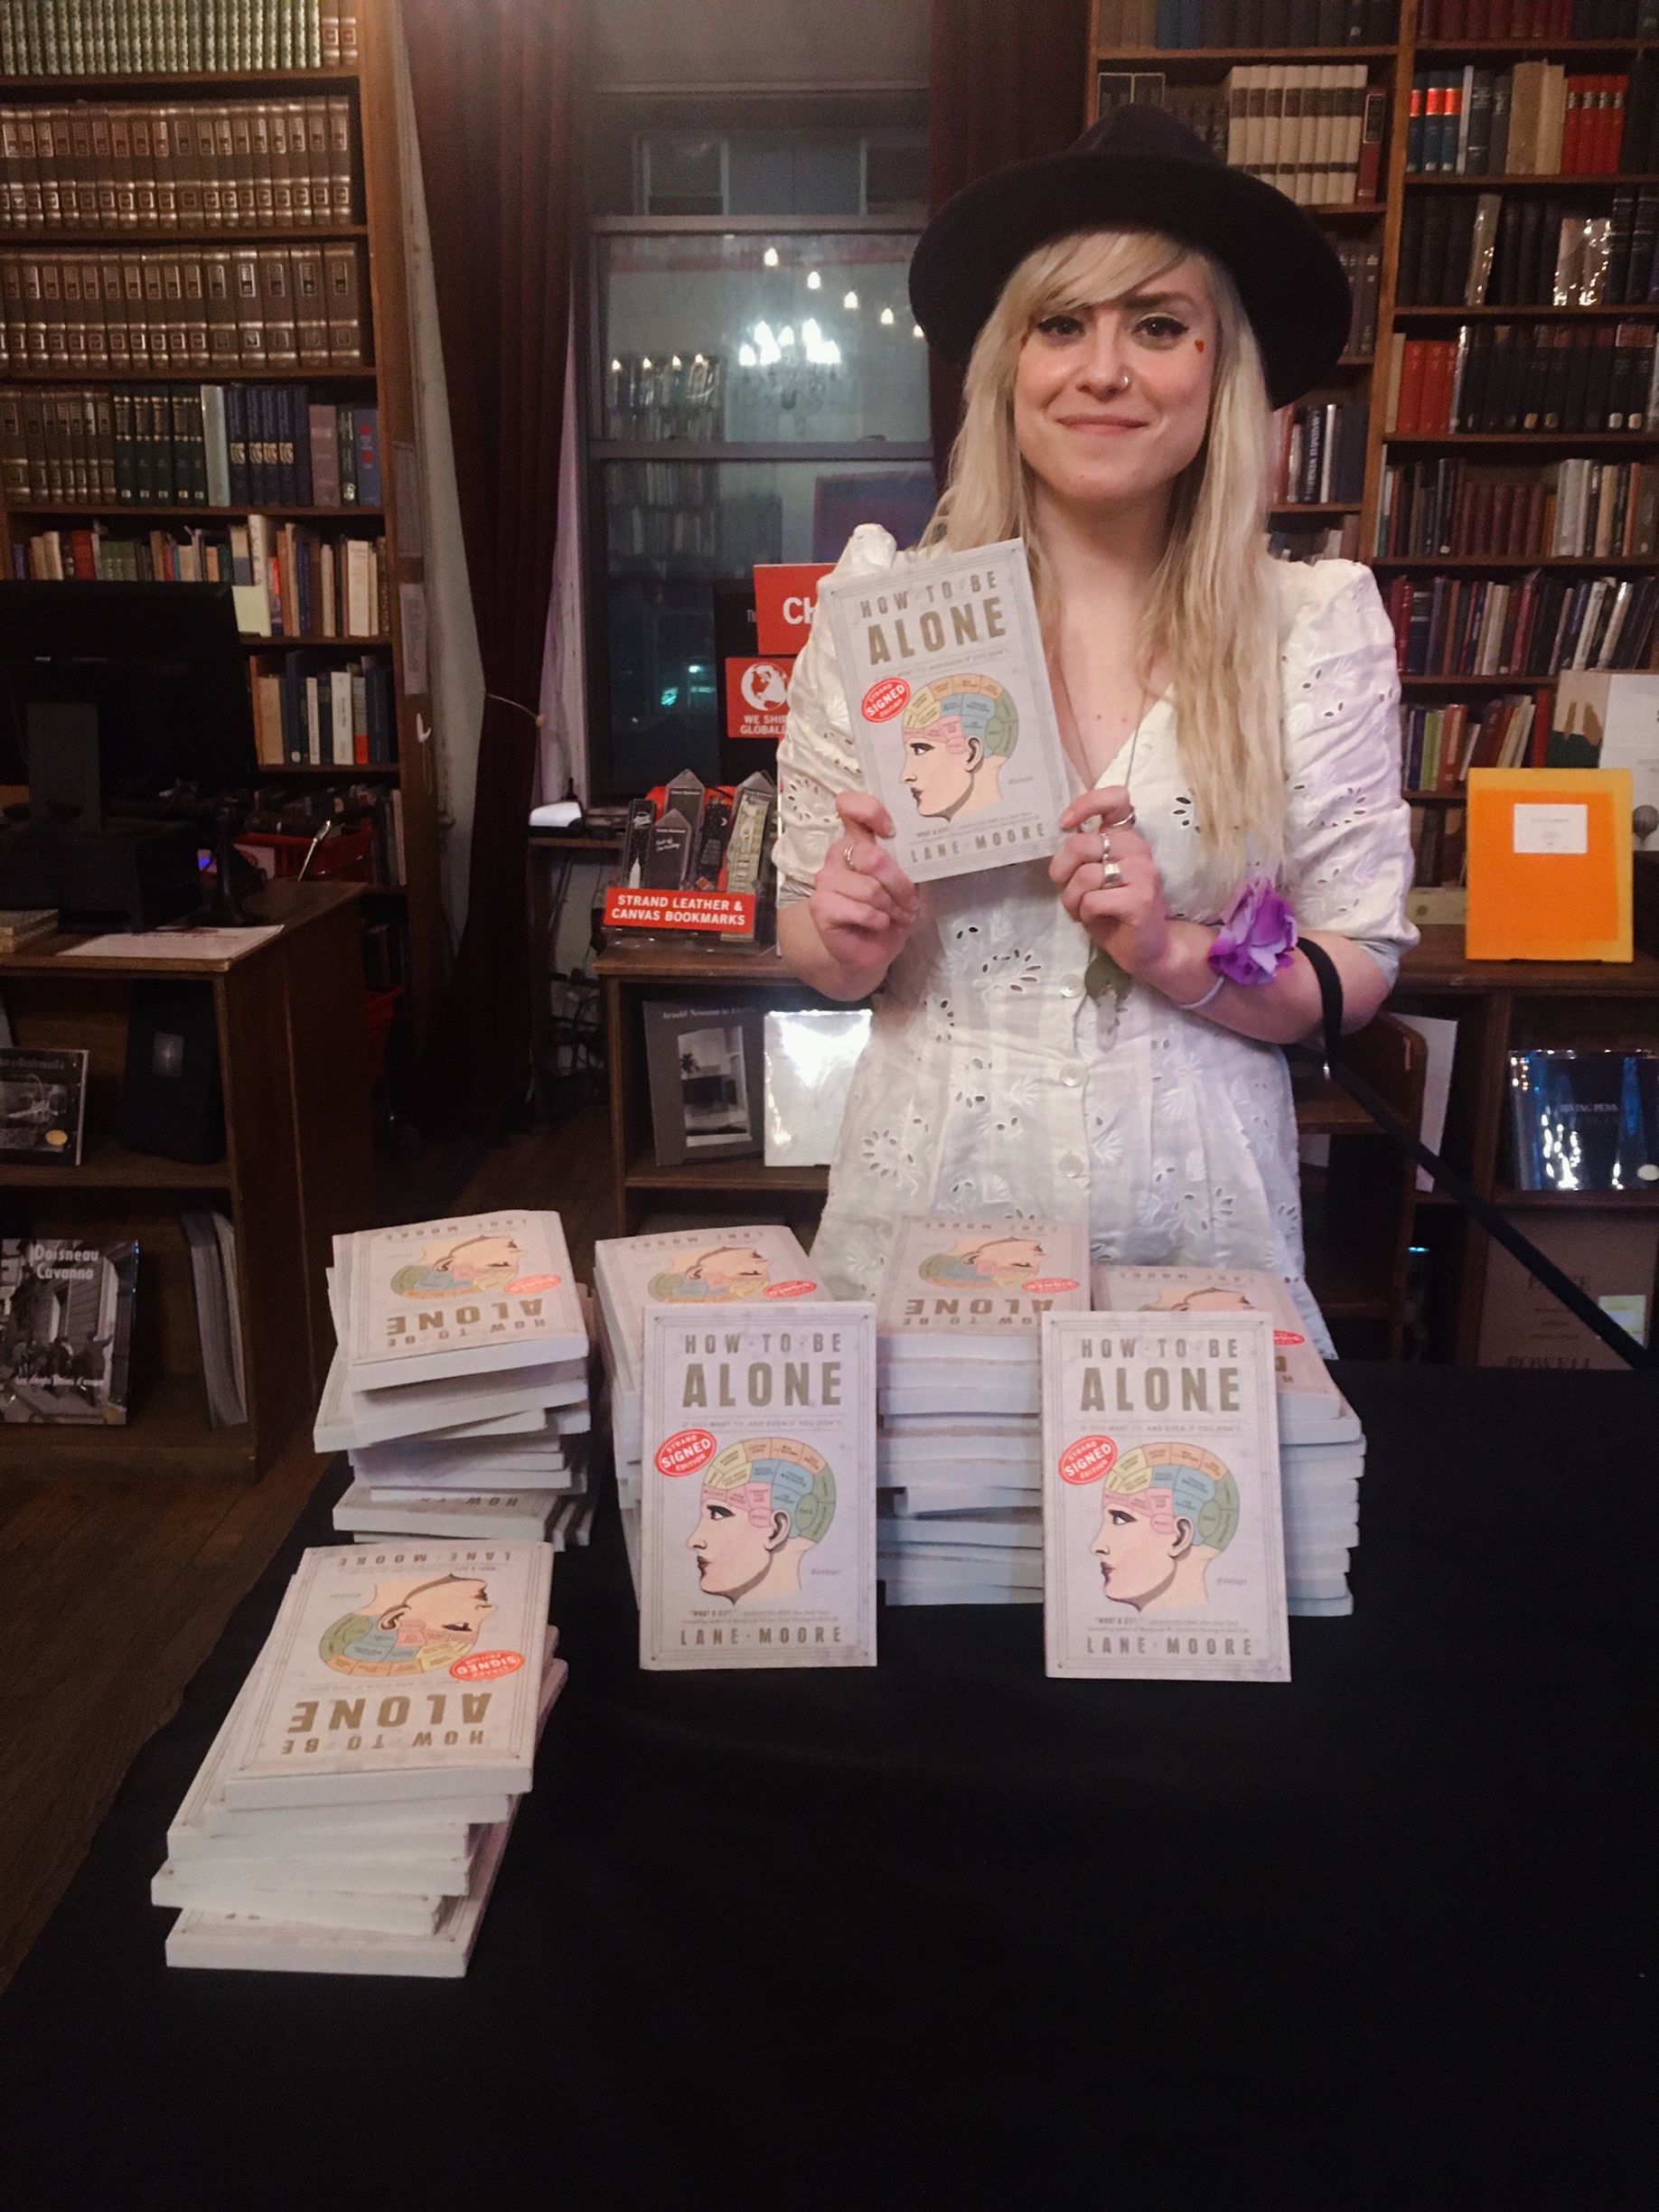 Lane Moore smiling and holding a copy of her book how to be alone during a booksigning event.